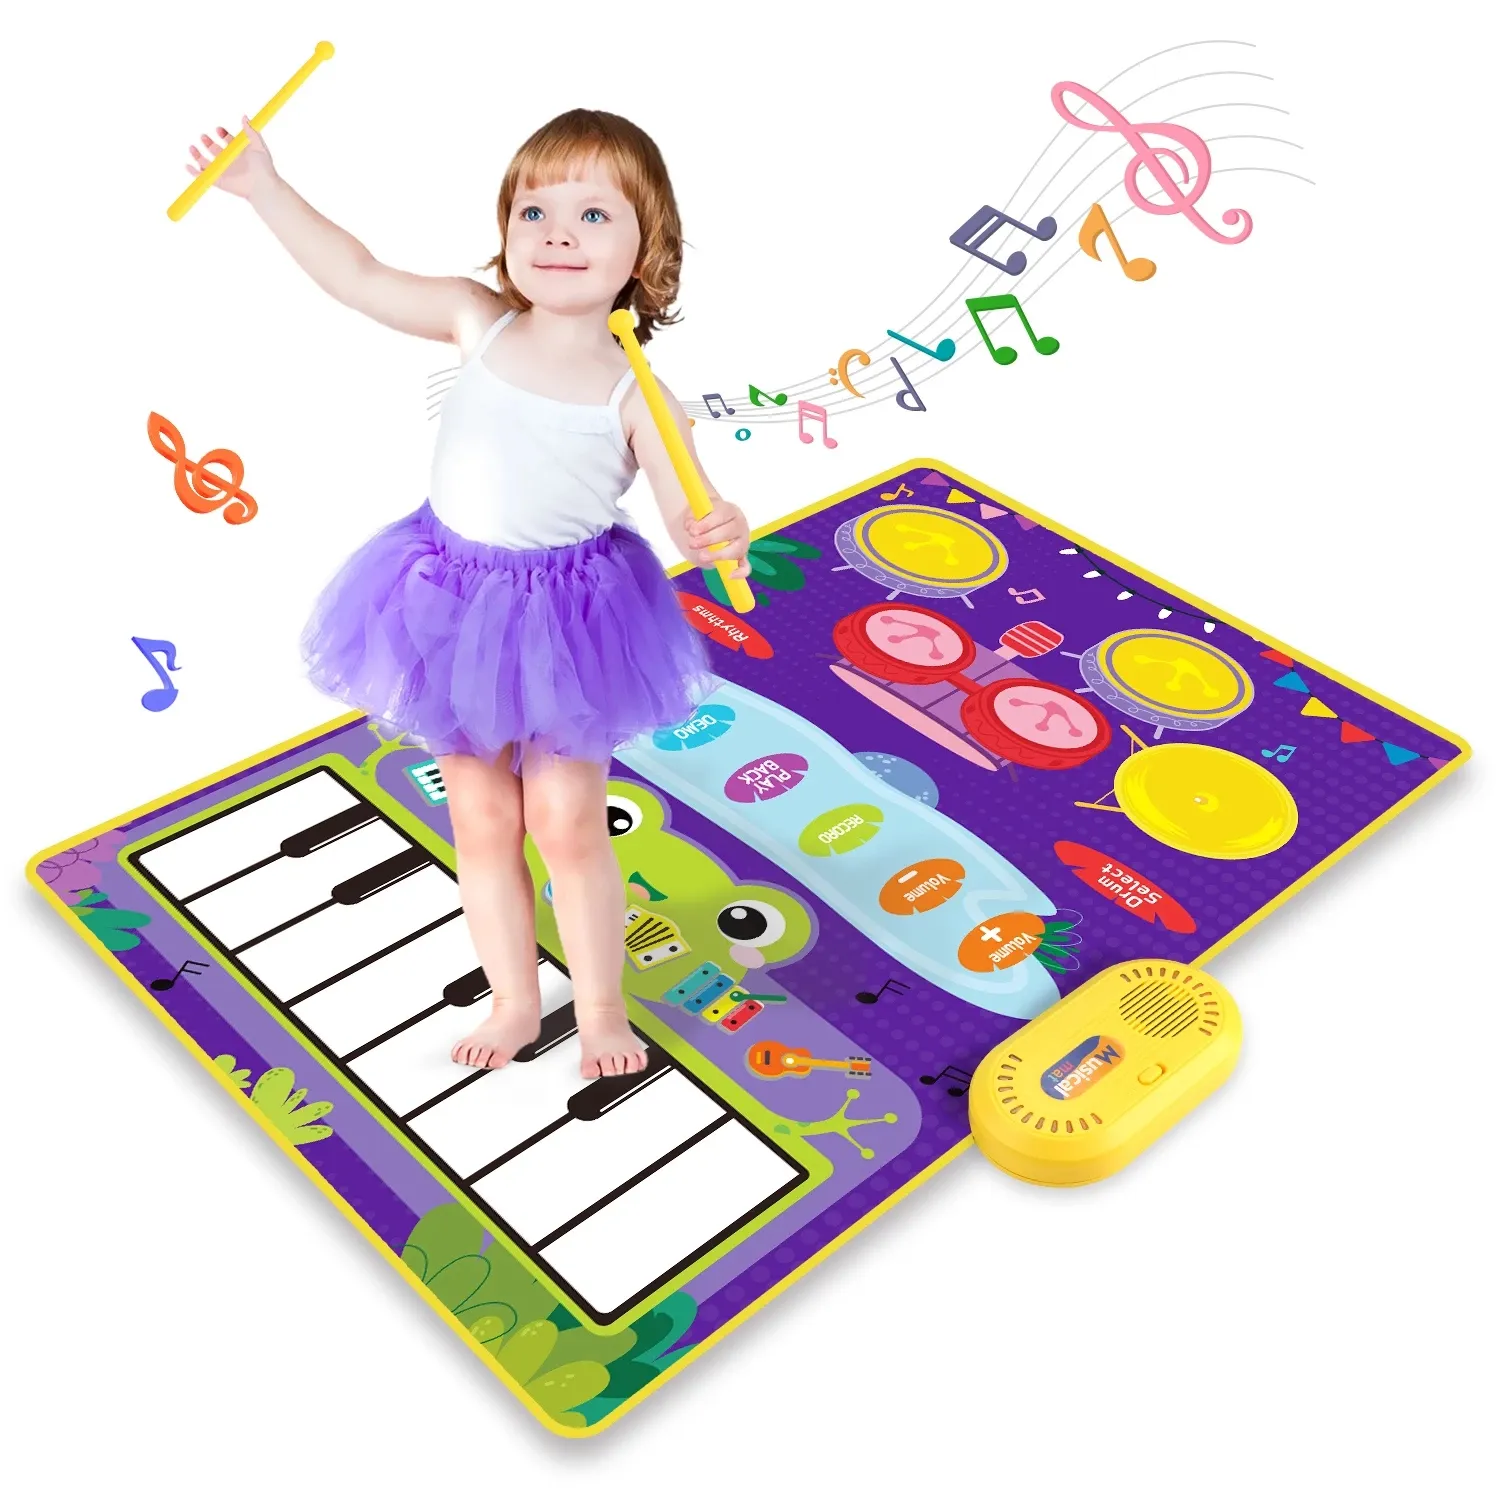 80x50cm Music Play Mat for Kids Toddlers Floor Piano Keyboard Drum Toys Dance Mat with 6 Instruments Sounds Educational Toys